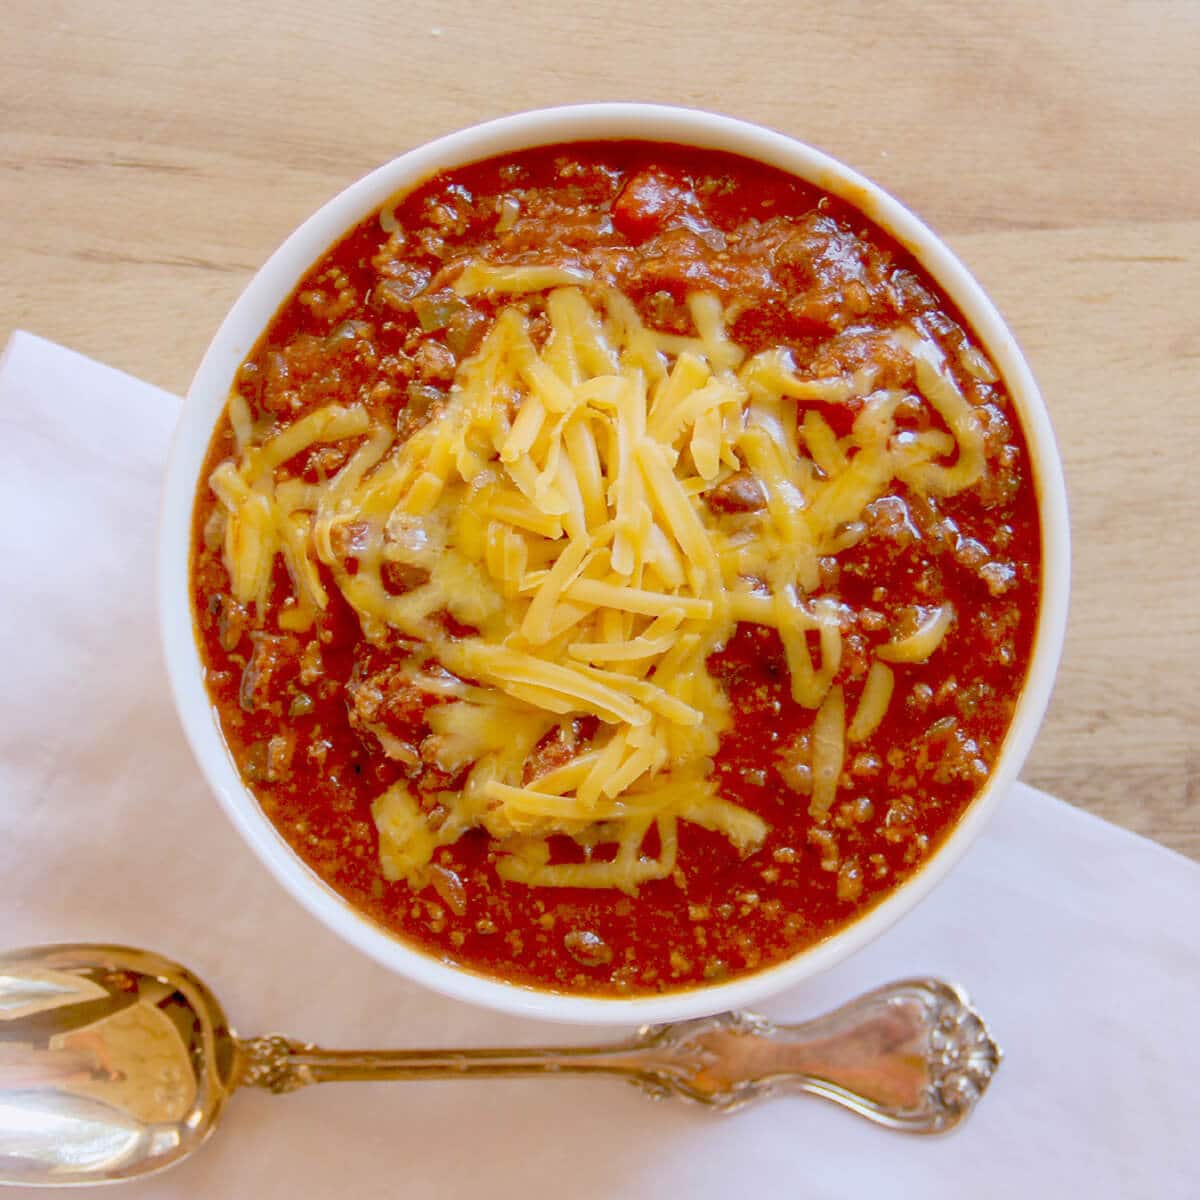 Chili Recipe with Ground Beef and Canned Beans - Easy!